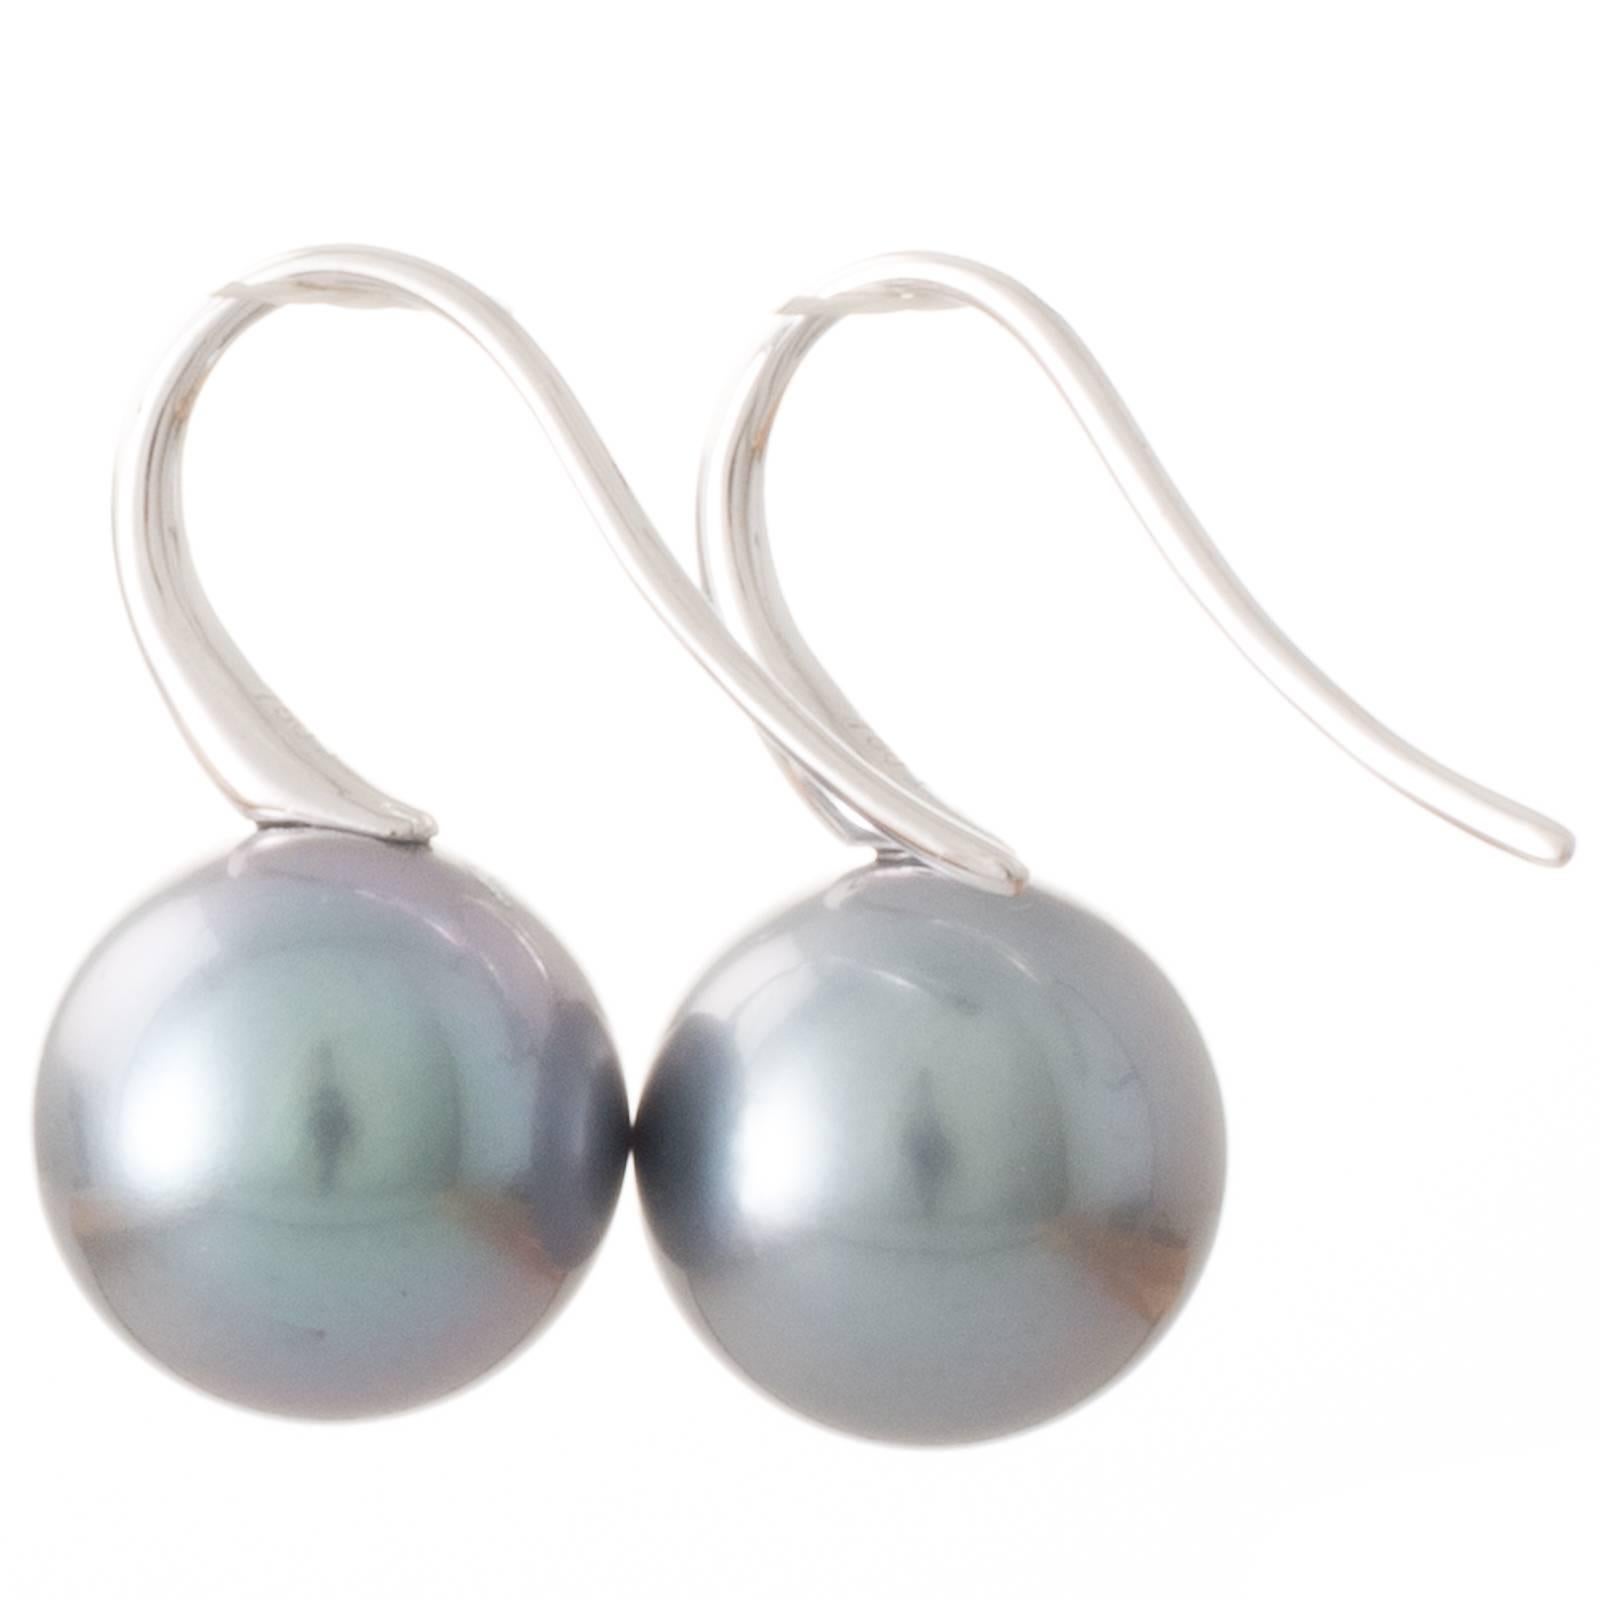 A pair of 18ct white gold Tahitian South Sea pearl earrings set with two round grey aubergine Tahitian pearls measuring 10 - 11mm with a good lustre and few natural surface marks. Set with 18ct white gold short hooks. 